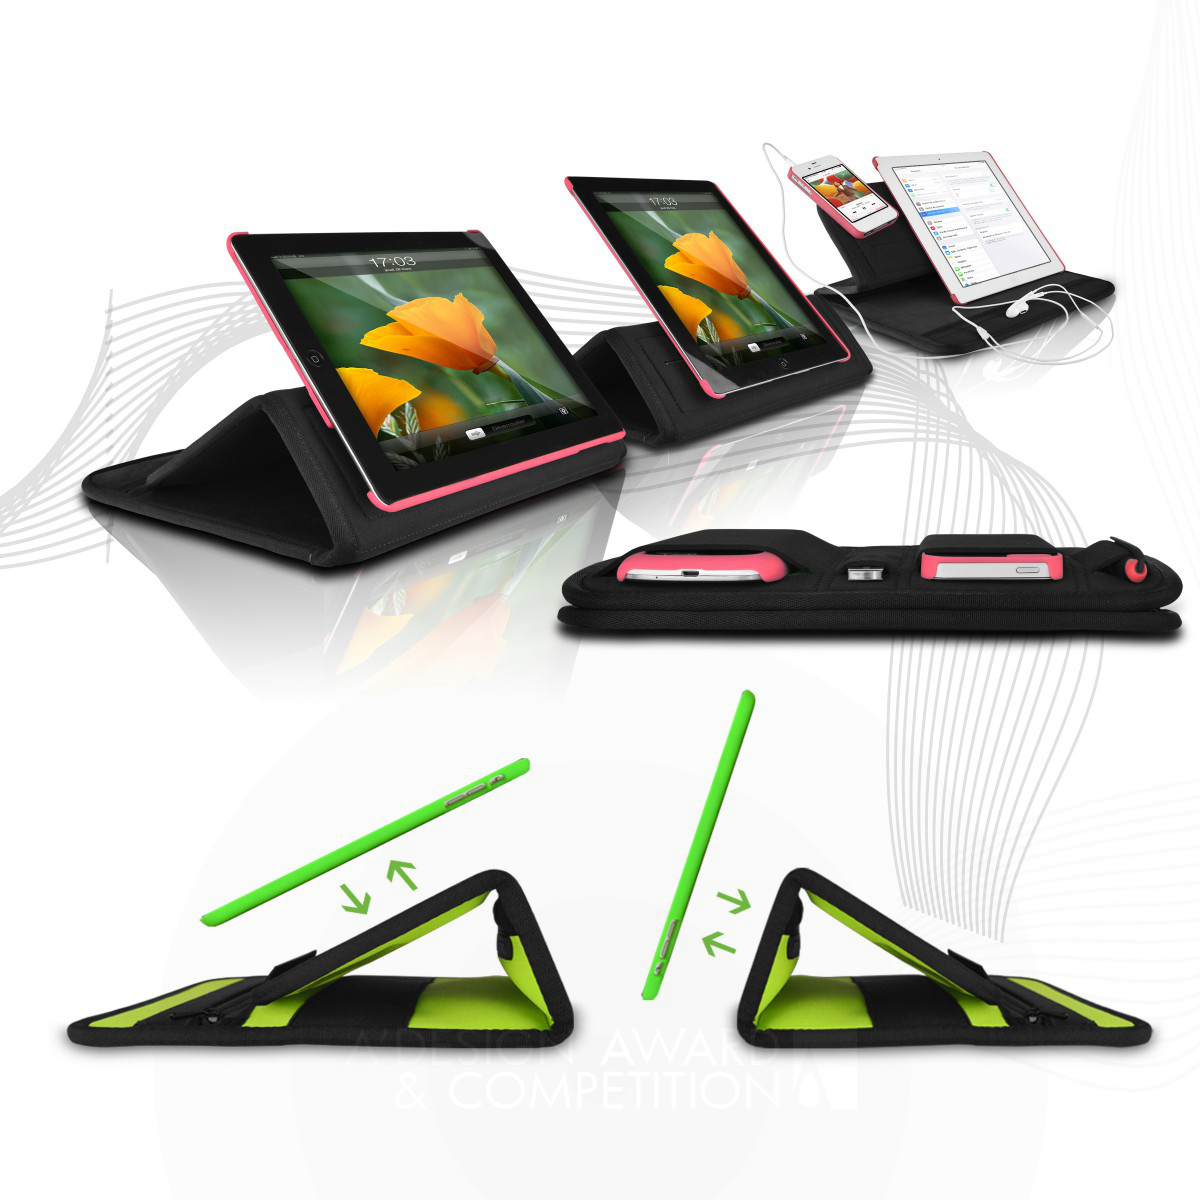 Itrox <b>Multifunctional magnetic Bag for Tablets